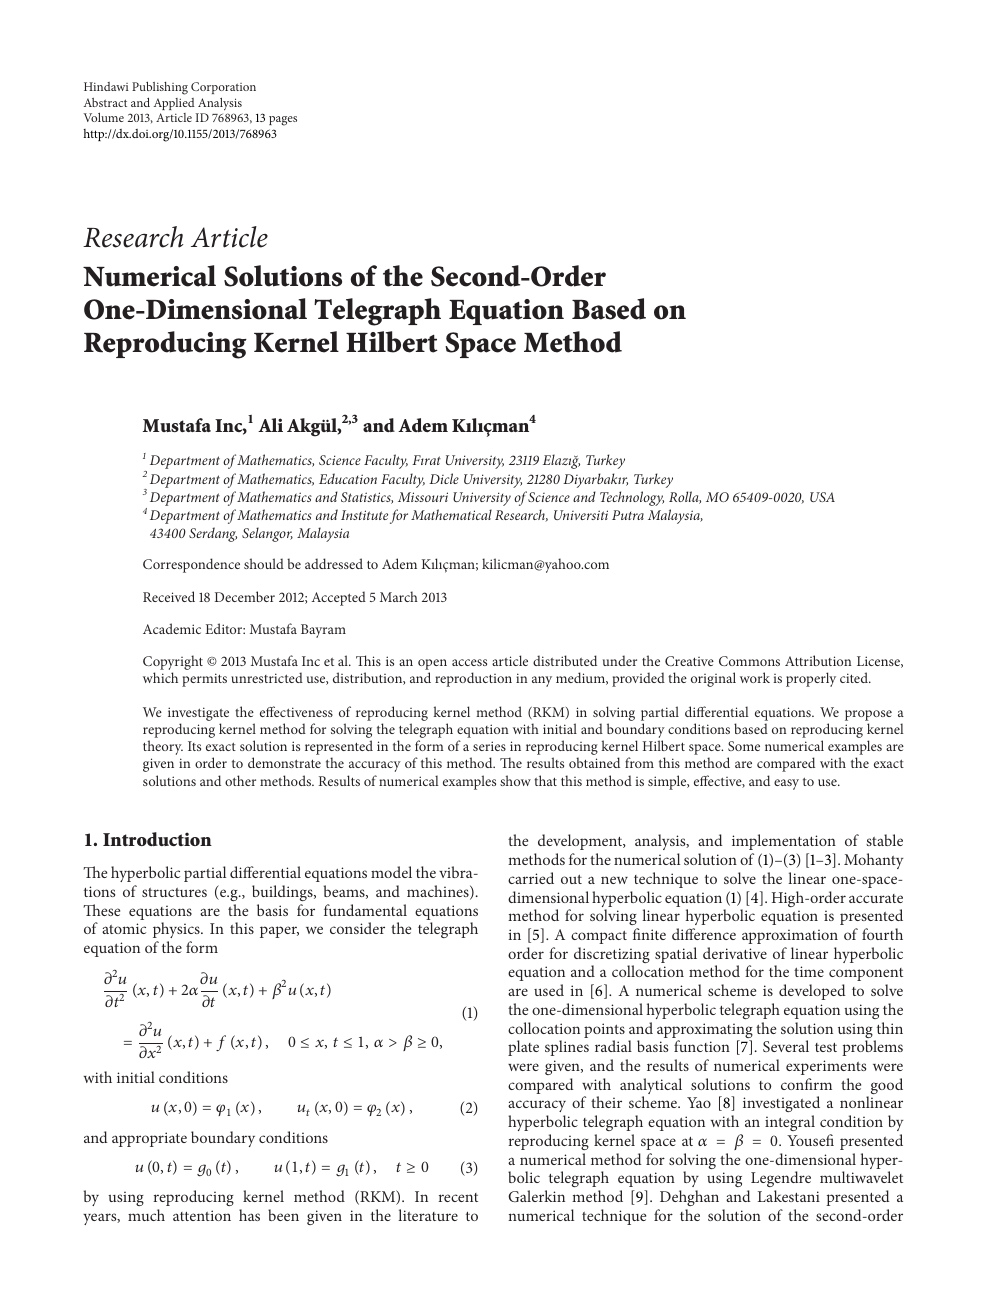 Numerical Solutions Of The Second Order One Dimensional Telegraph Equation Based On Reproducing Kernel Hilbert Space Method Topic Of Research Paper In Mathematics Download Scholarly Article Pdf And Read For Free On Cyberleninka